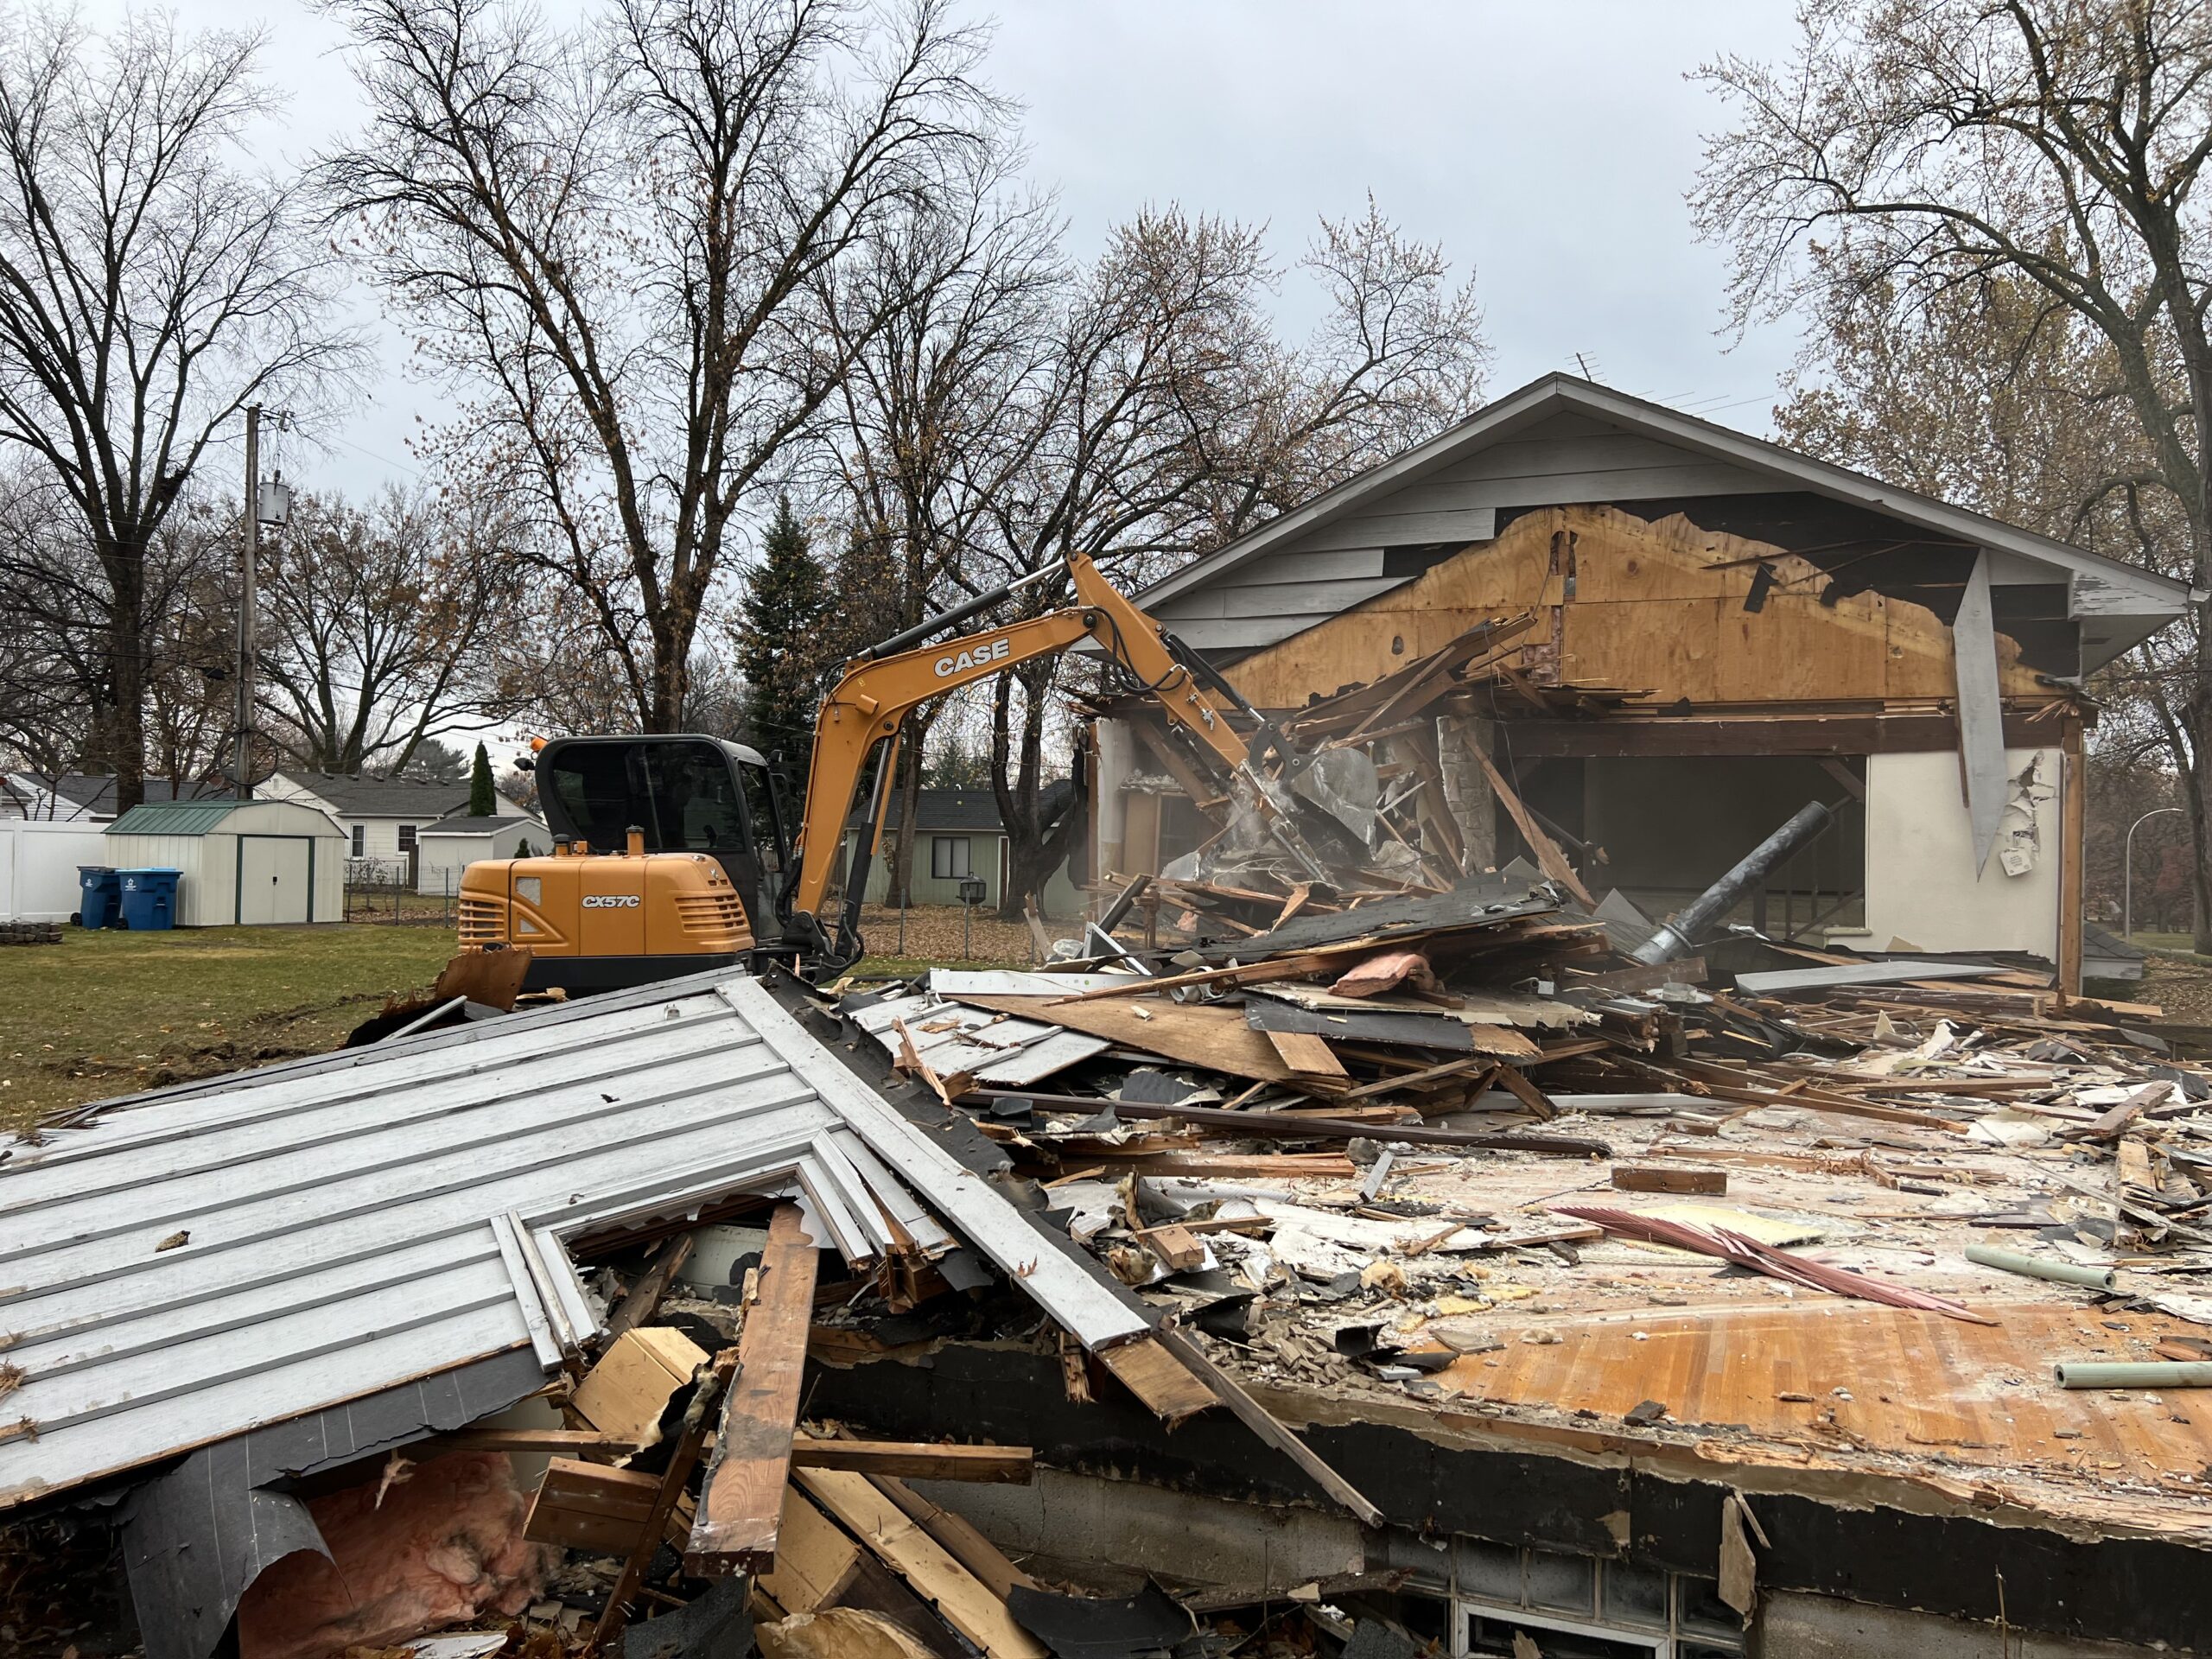 Twin Cities metro area General Demolition services for commercial and residential needs from Voehl Construction Inc.